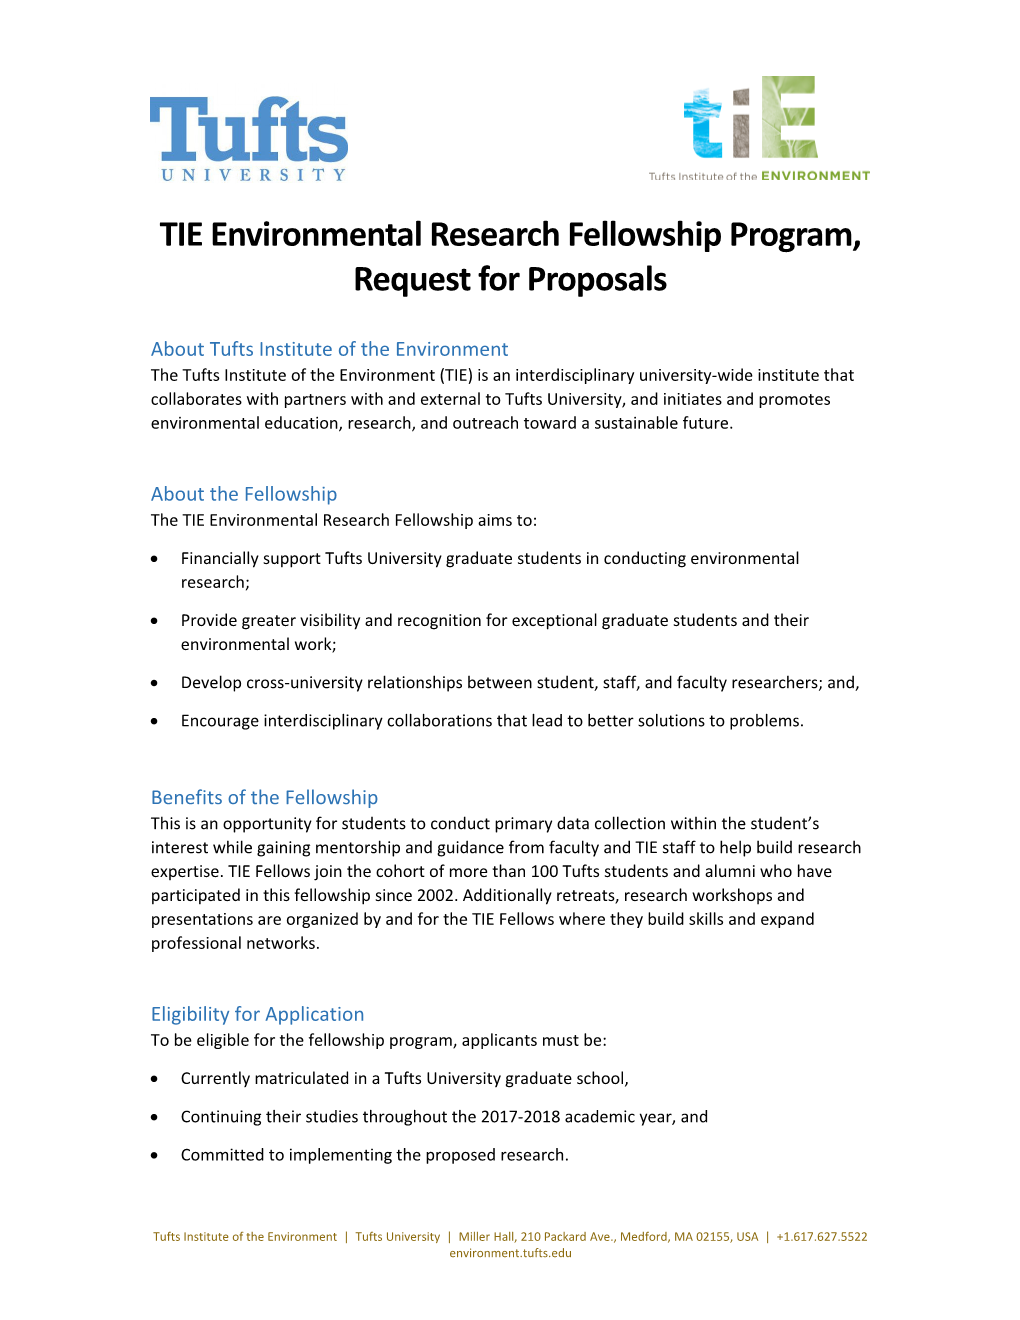 TIE Environmental Research Fellowship Program, Request for Proposals